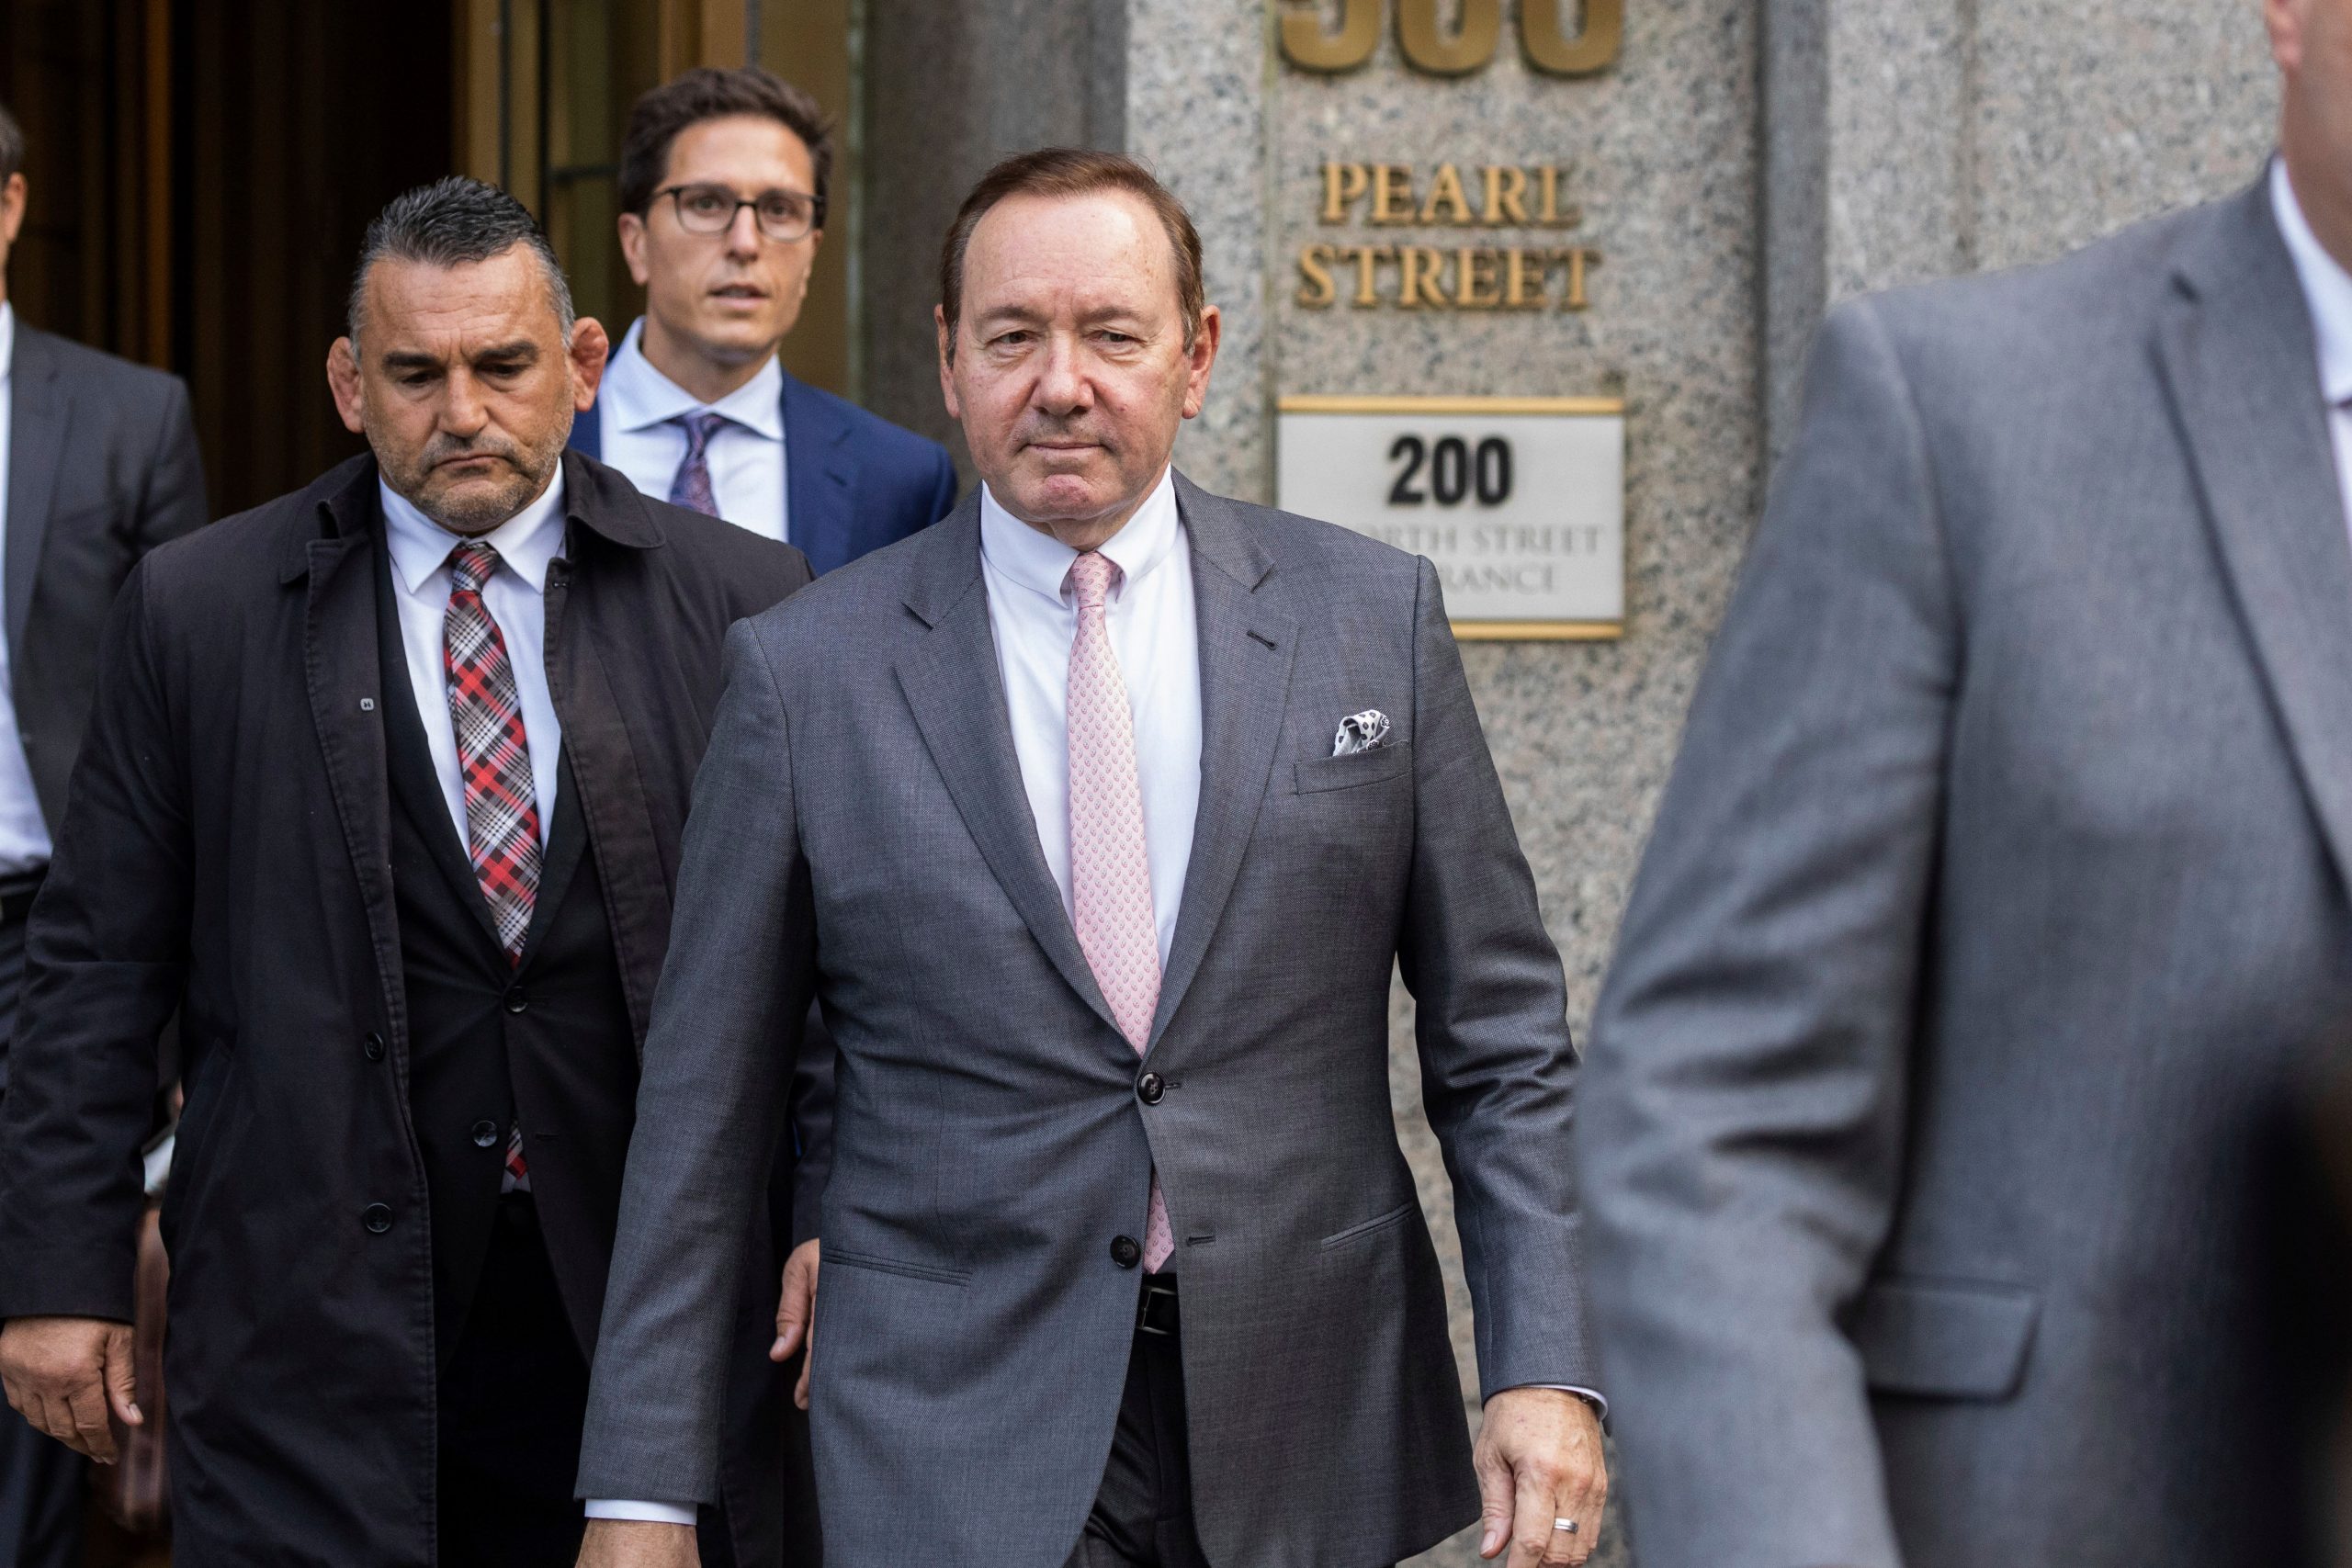 Kevin Spacey did not molest Anthony Rapp in 1986: Jury acquits actor